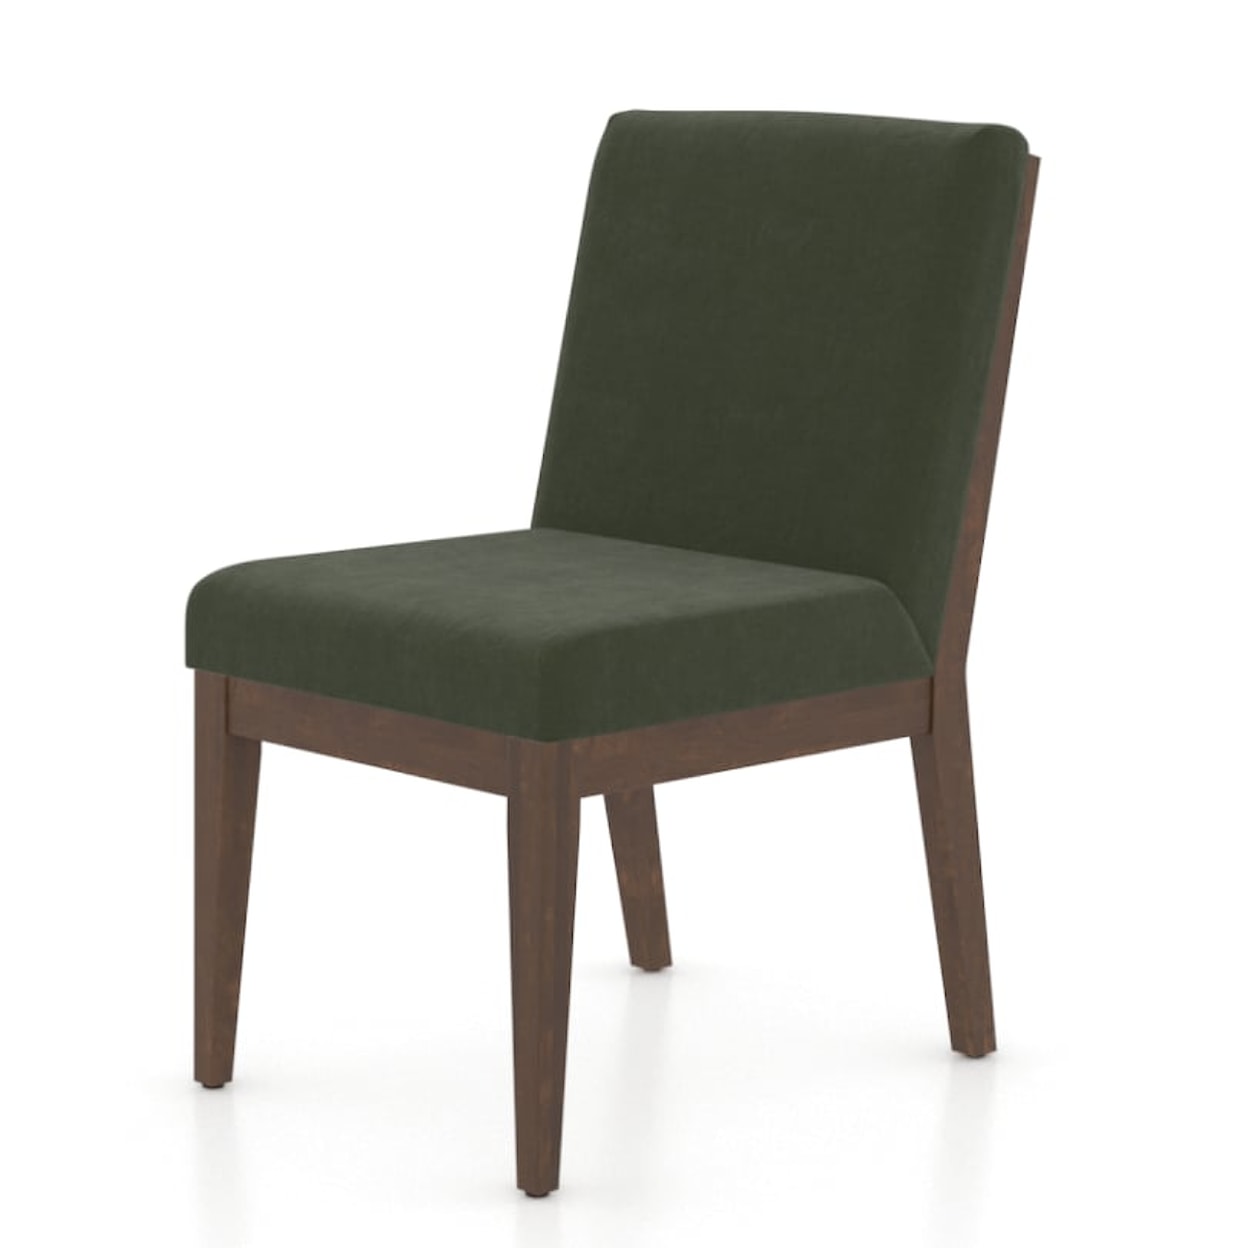 Canadel Dining Sets 5179 Dining Chair